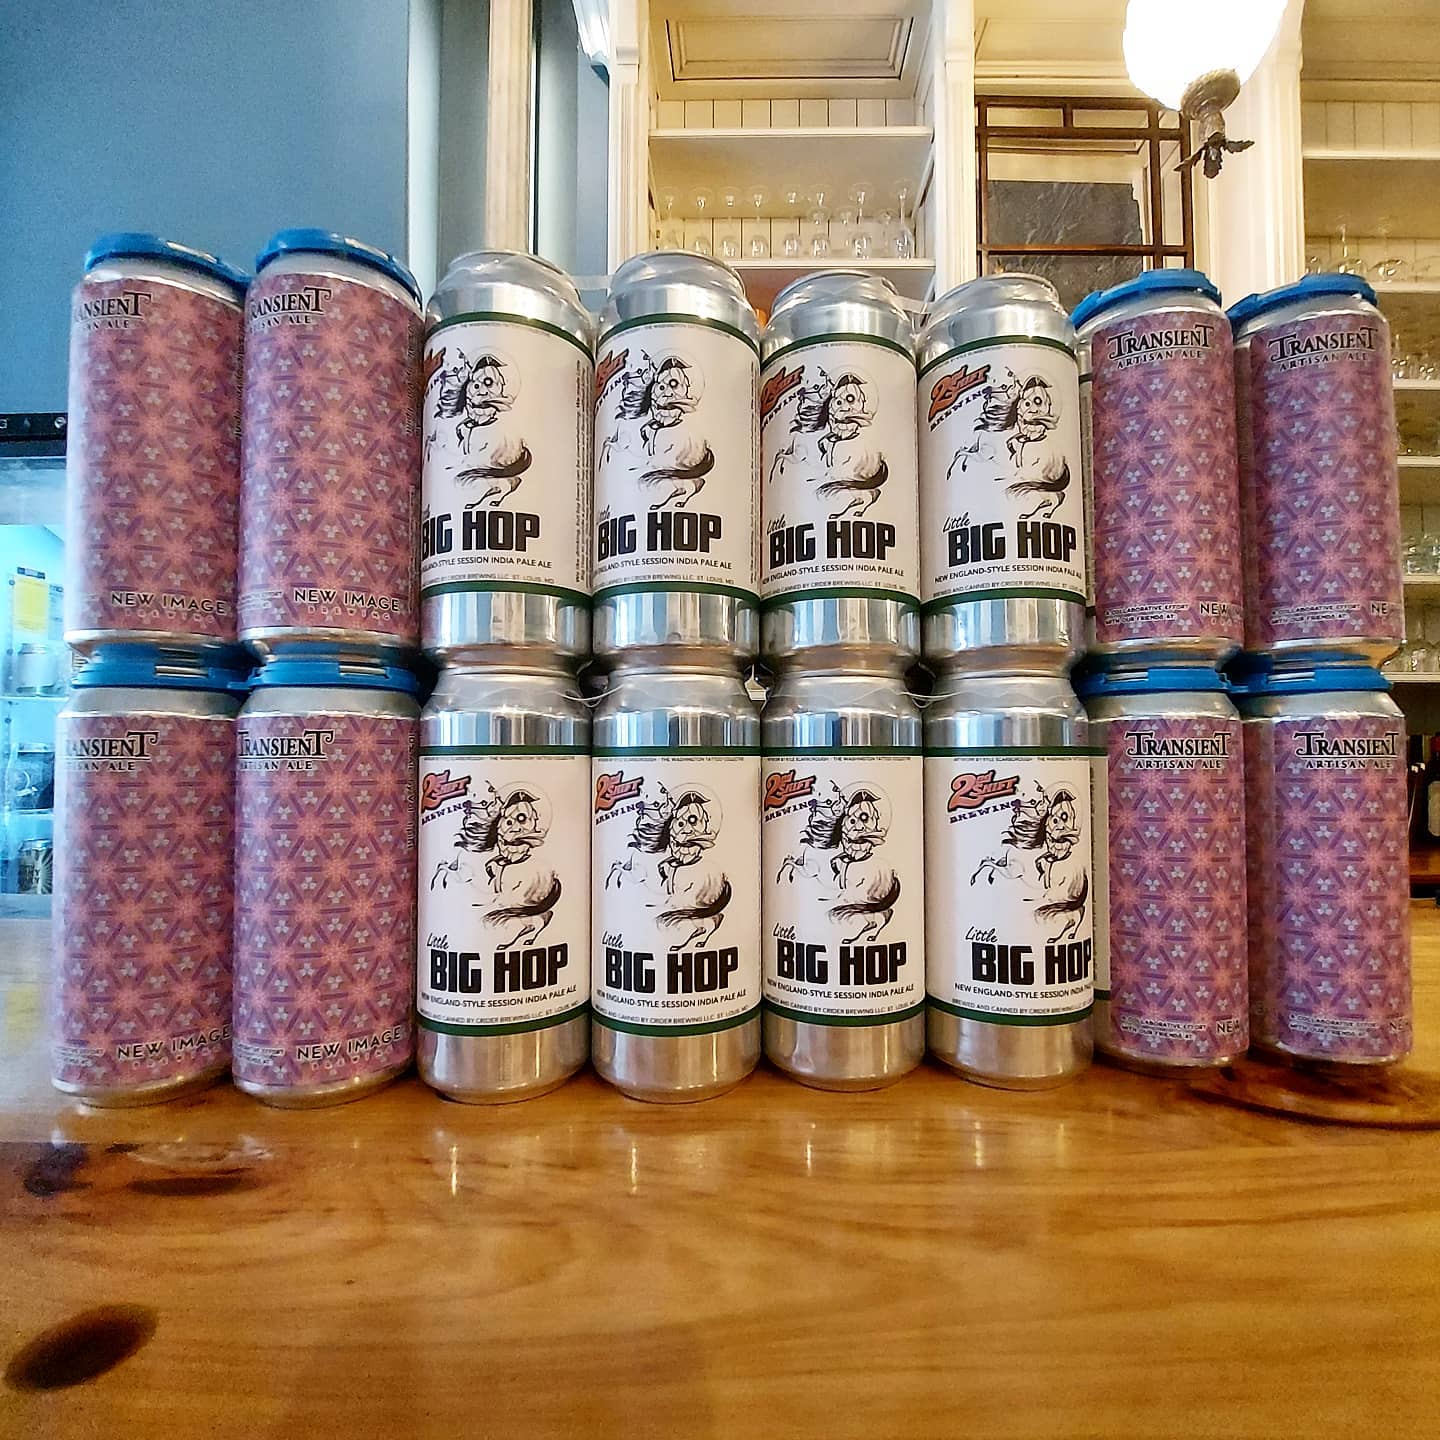 Cans of No Third Eye and Little Big Hop  from Transient Artisan Ales and Second Shift Brewing respectively